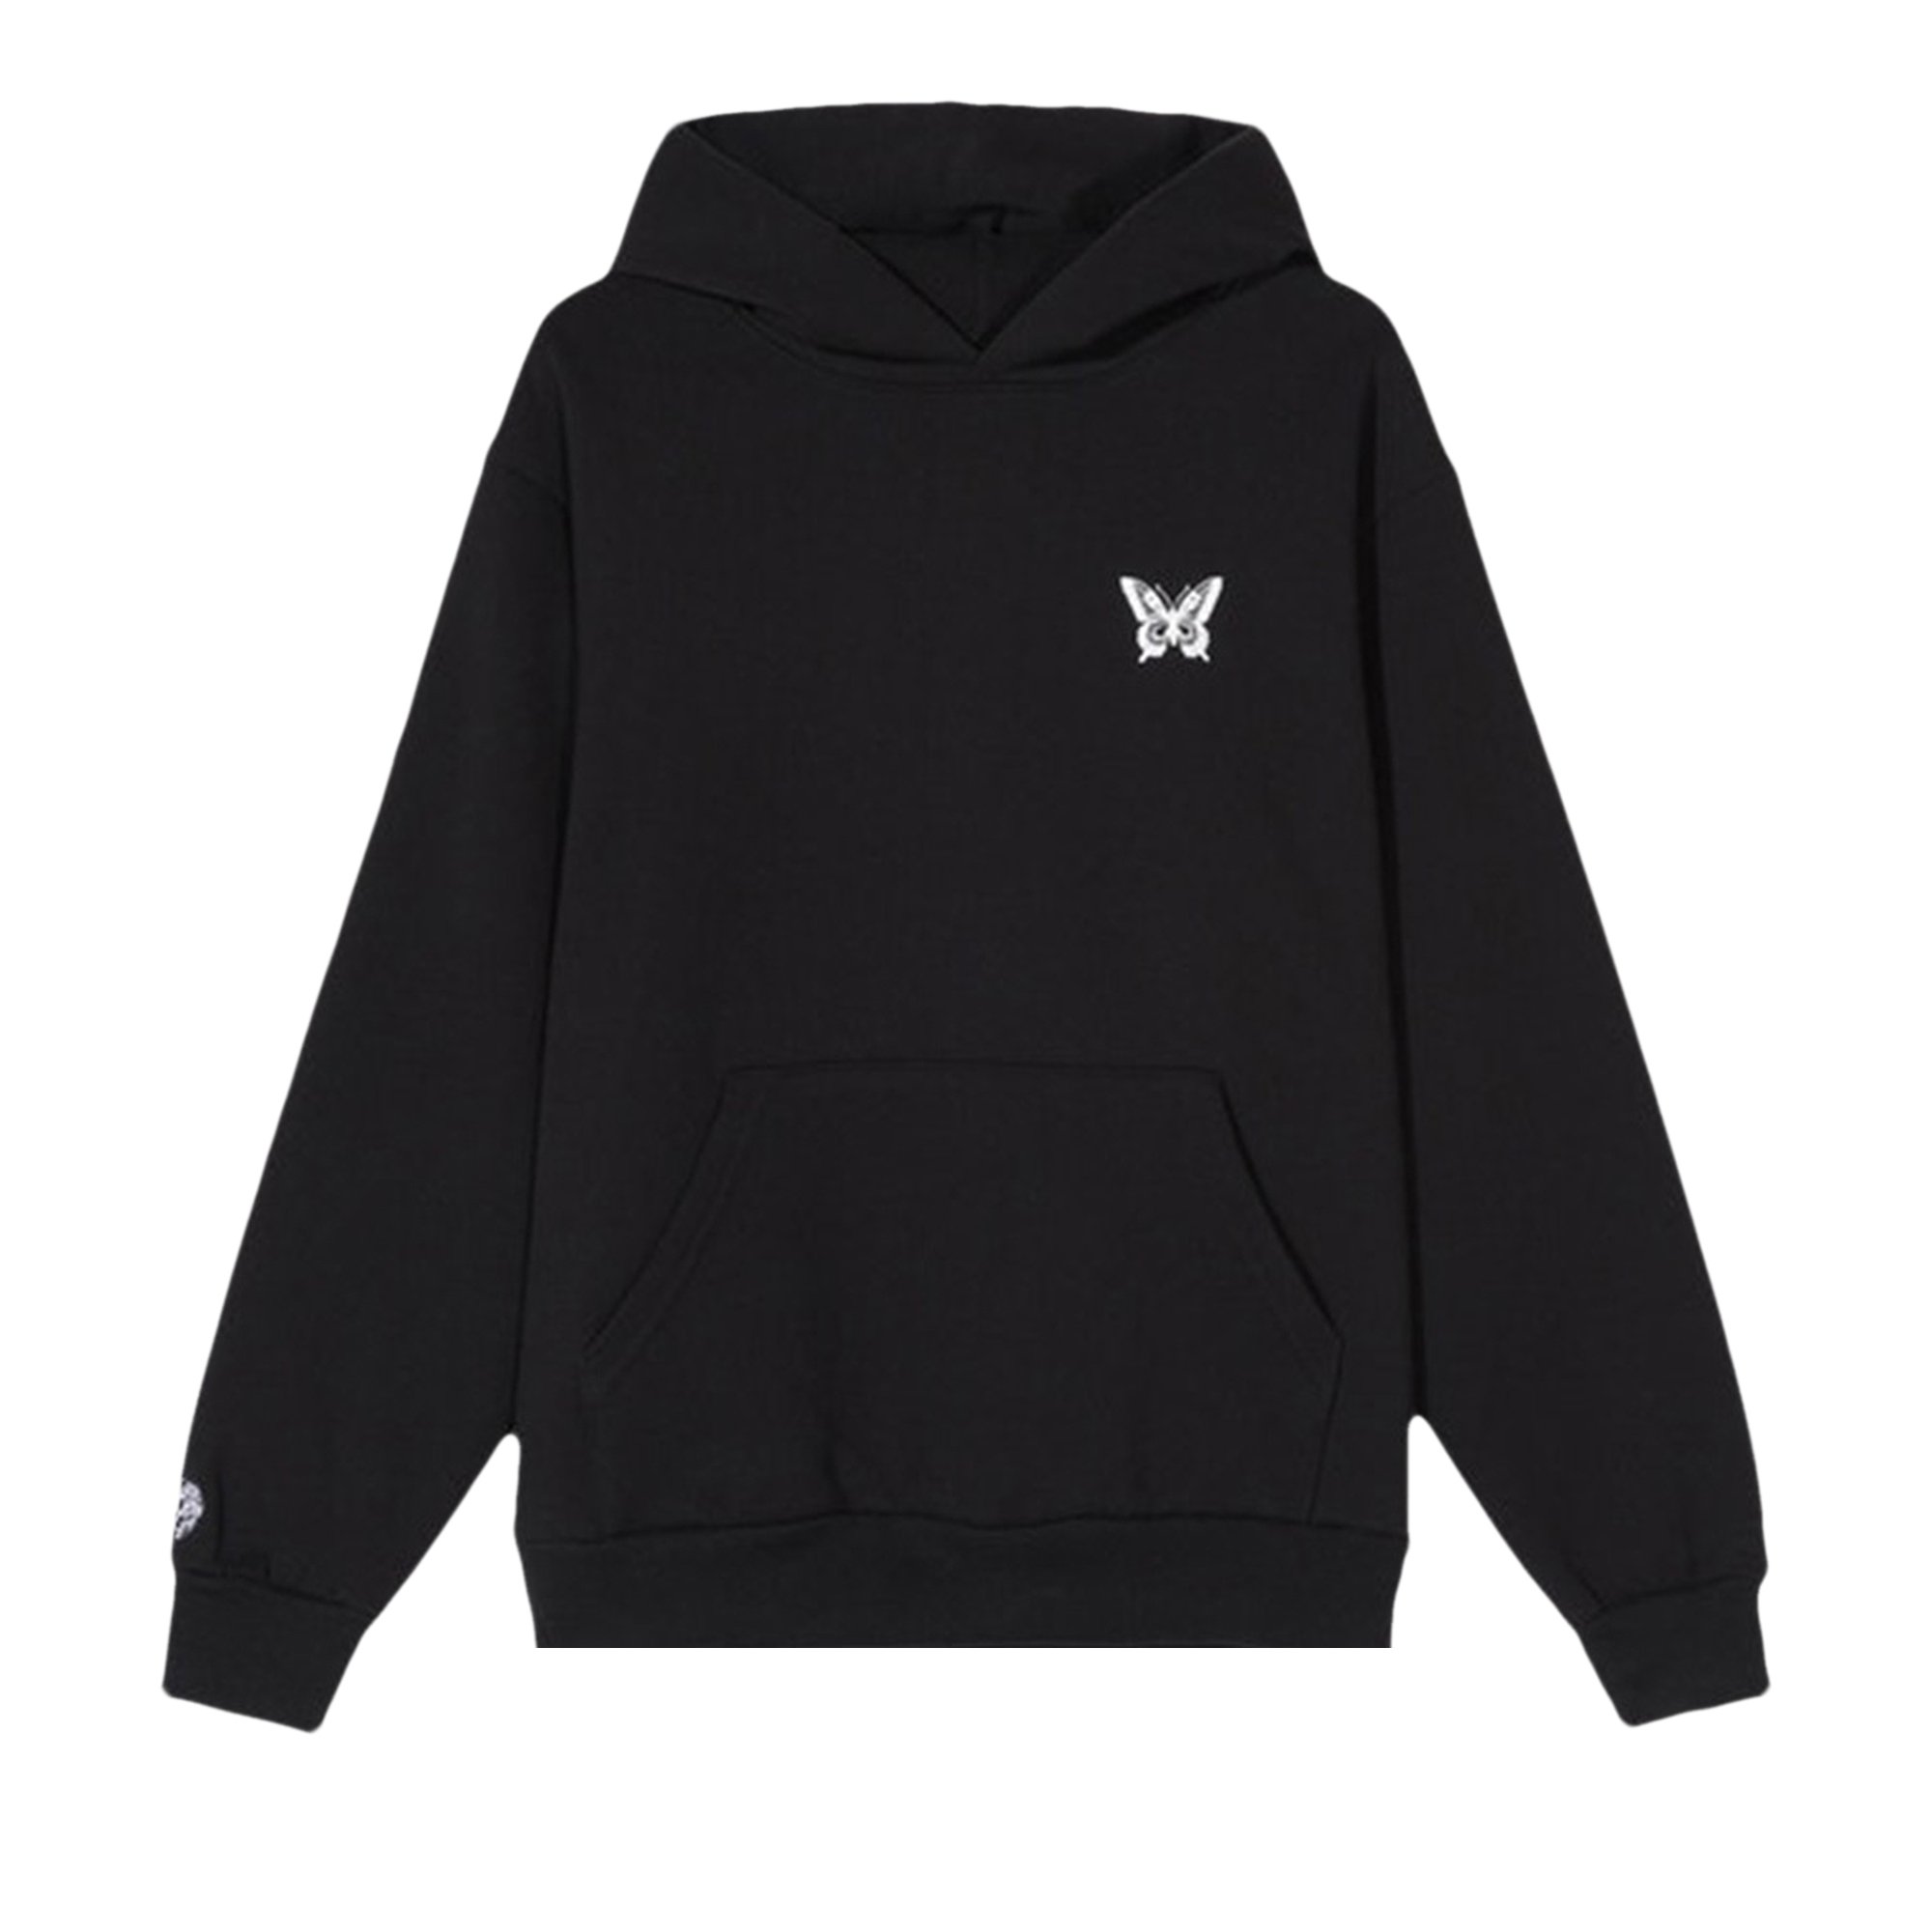 Buy Girls Don't Cry Butterfly Hoodie 'Black' - 2109 ...